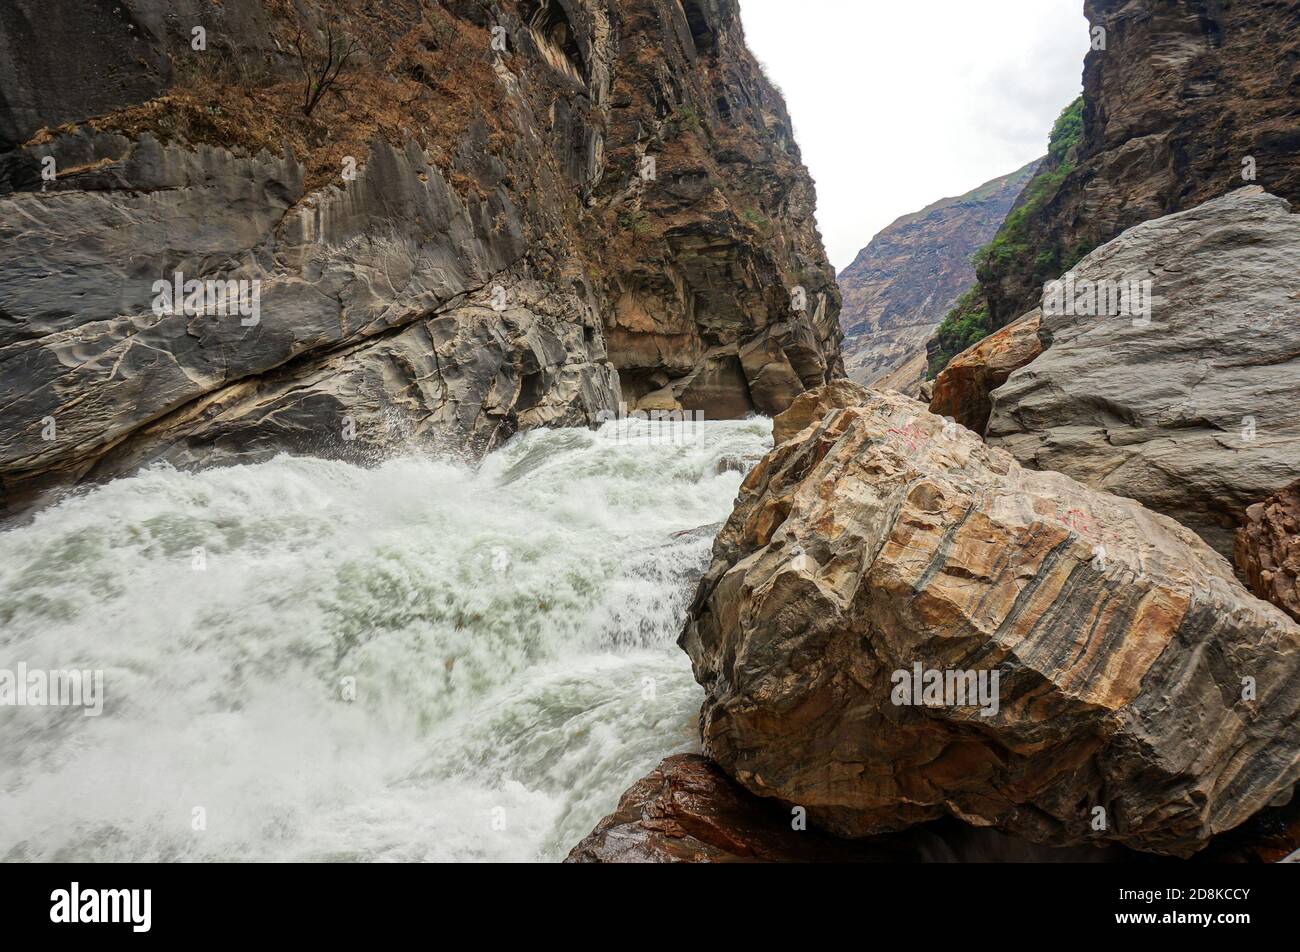 Wild river in the brown mountains. Stripy rock on the front Stock Photo